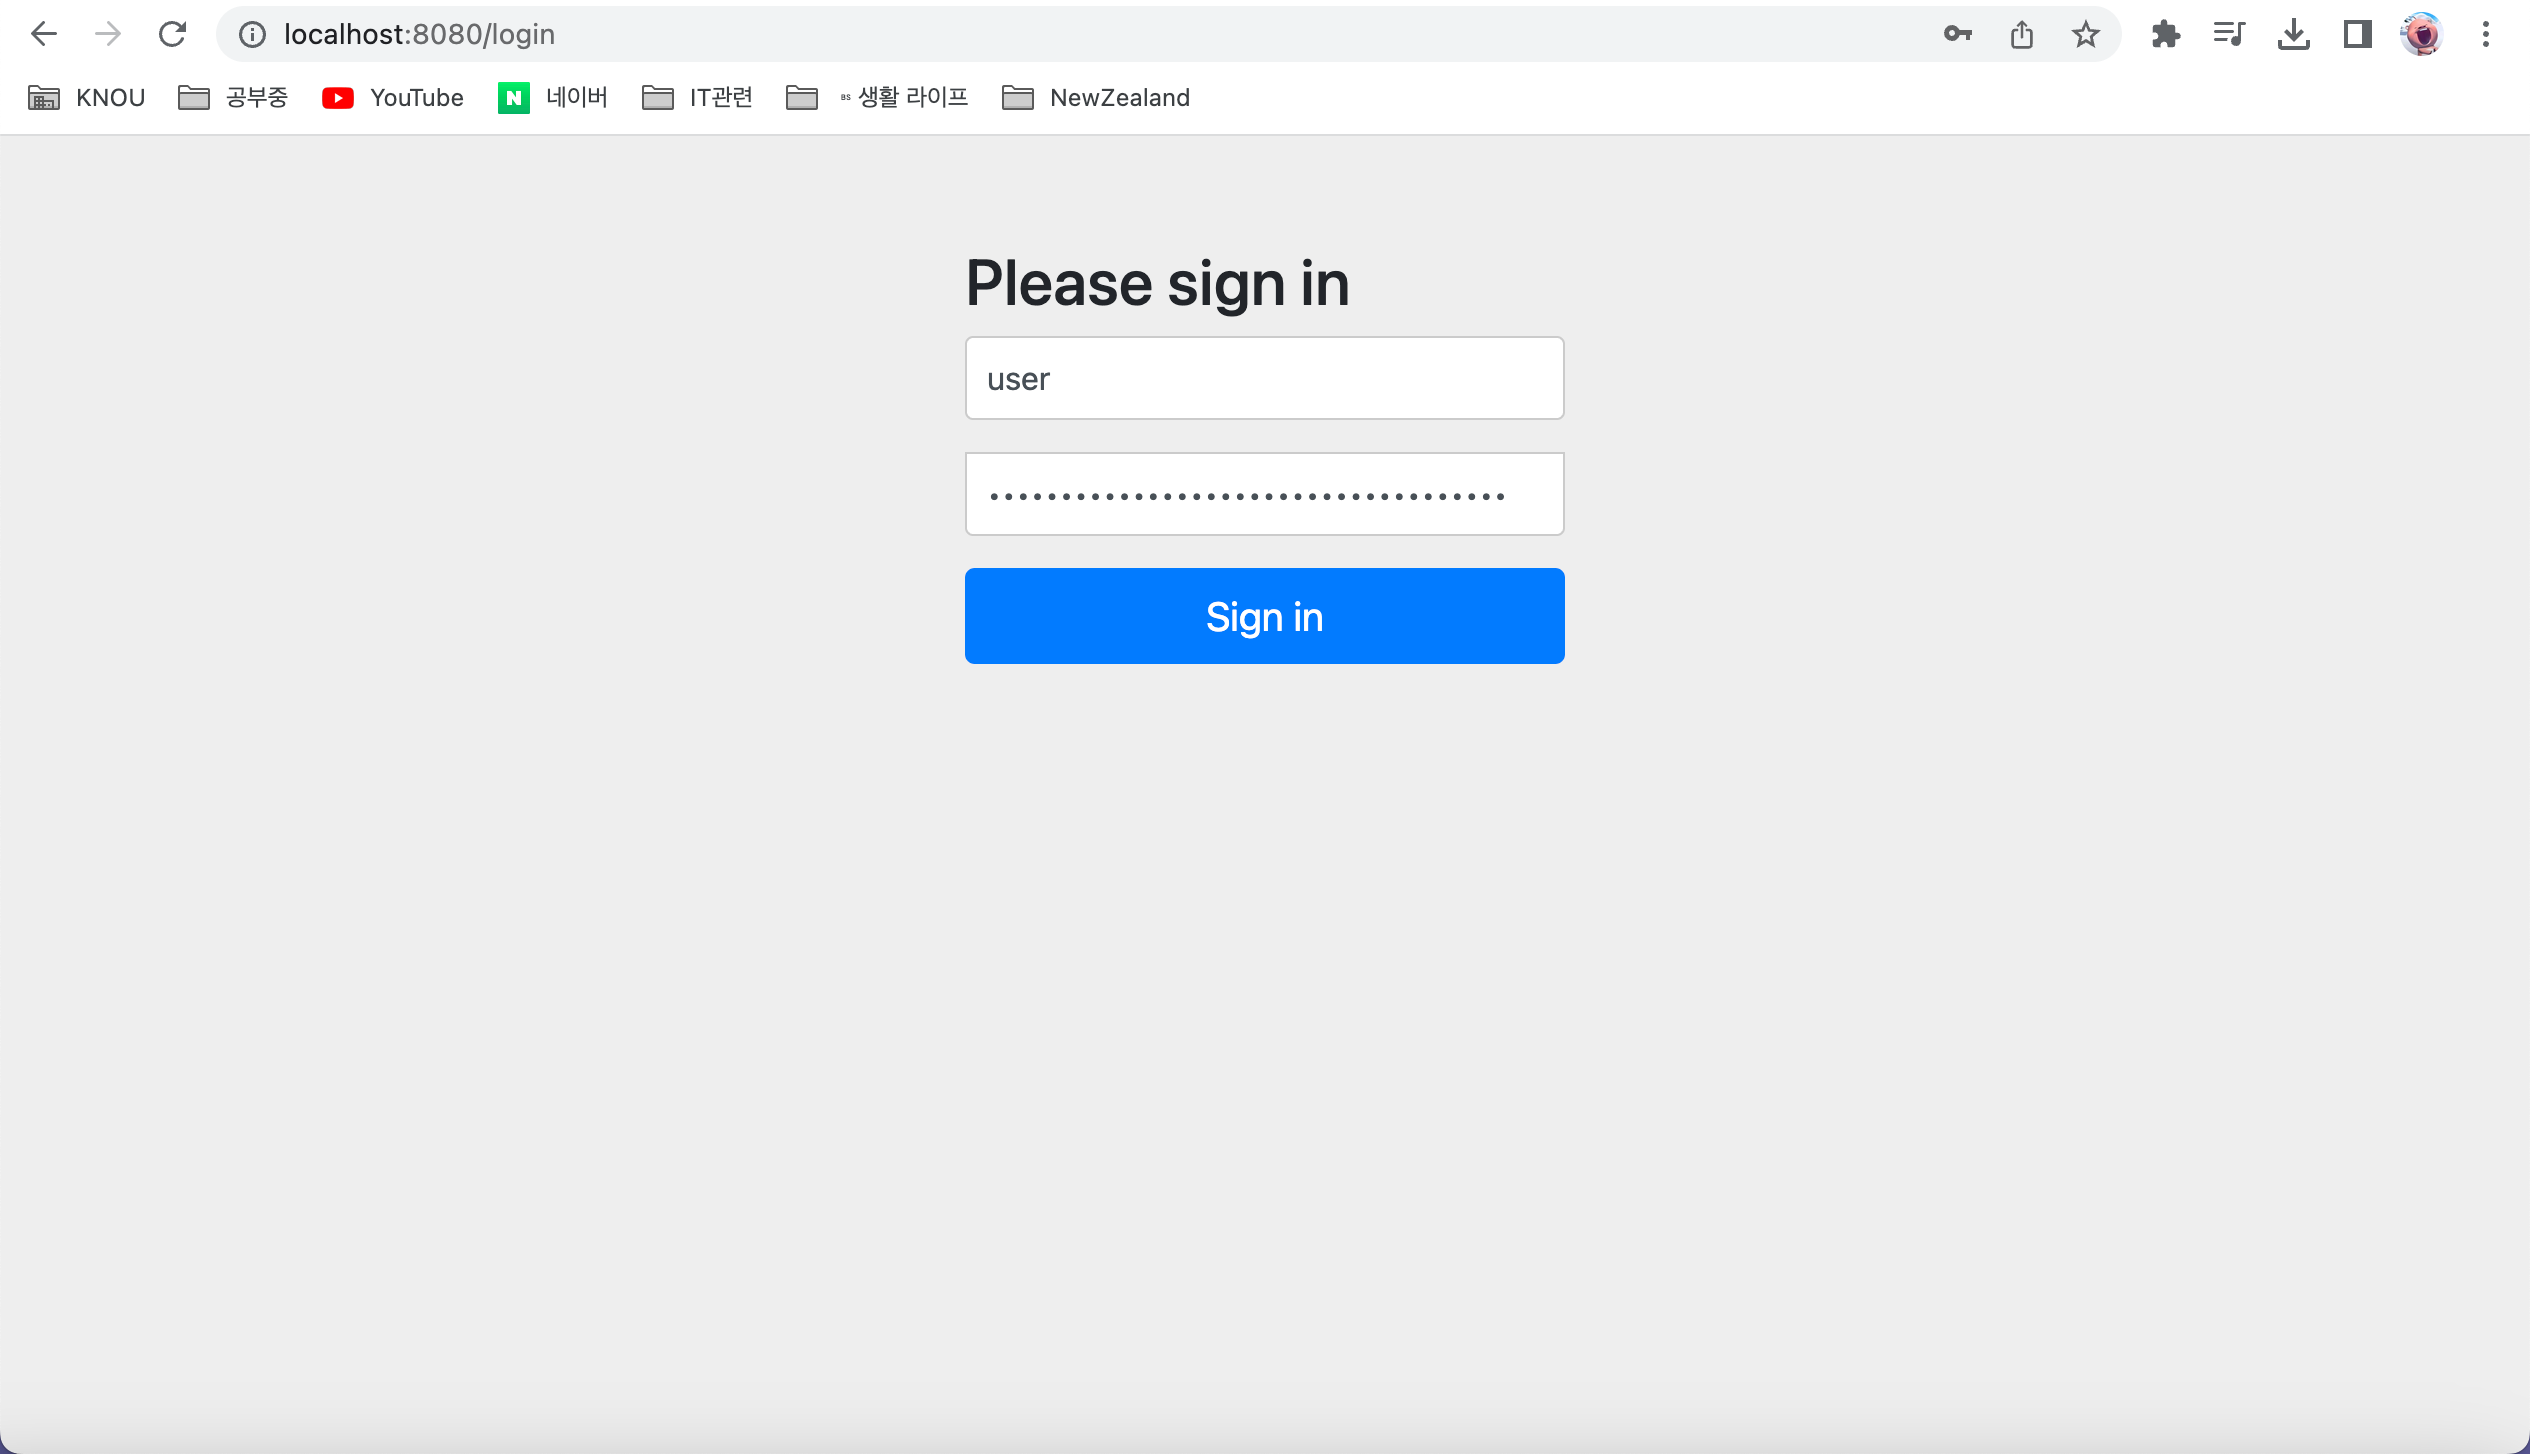 Security Login page